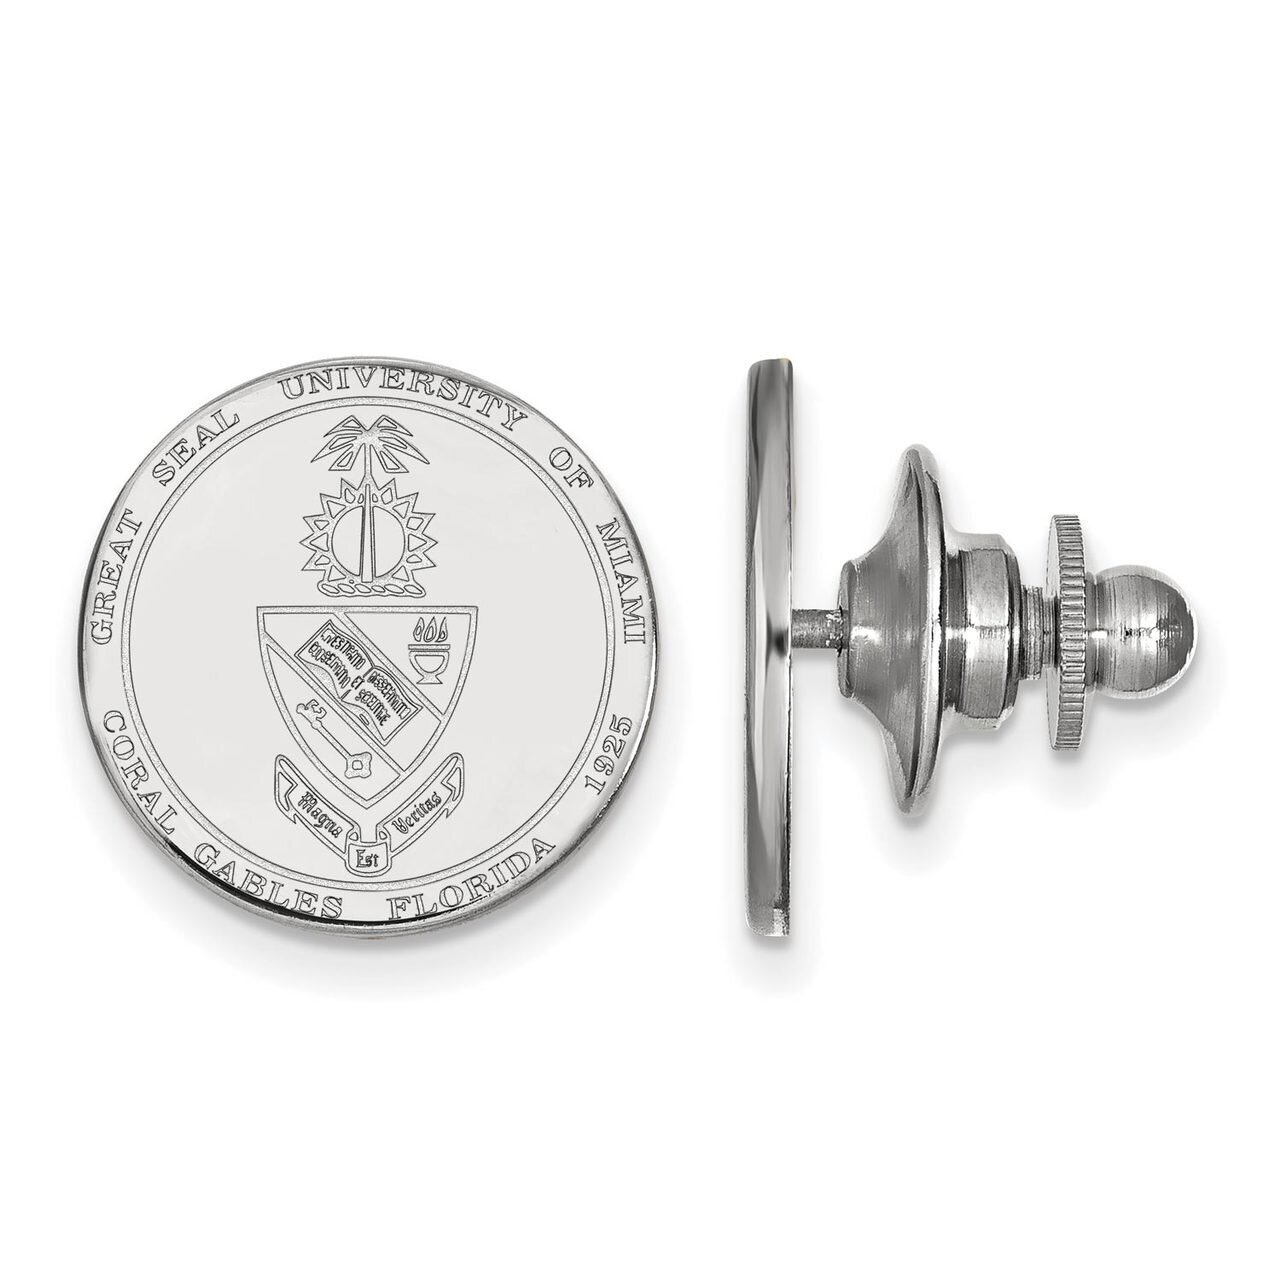 University of Miami Crest Lapel Pin Sterling Silver SS068UMF